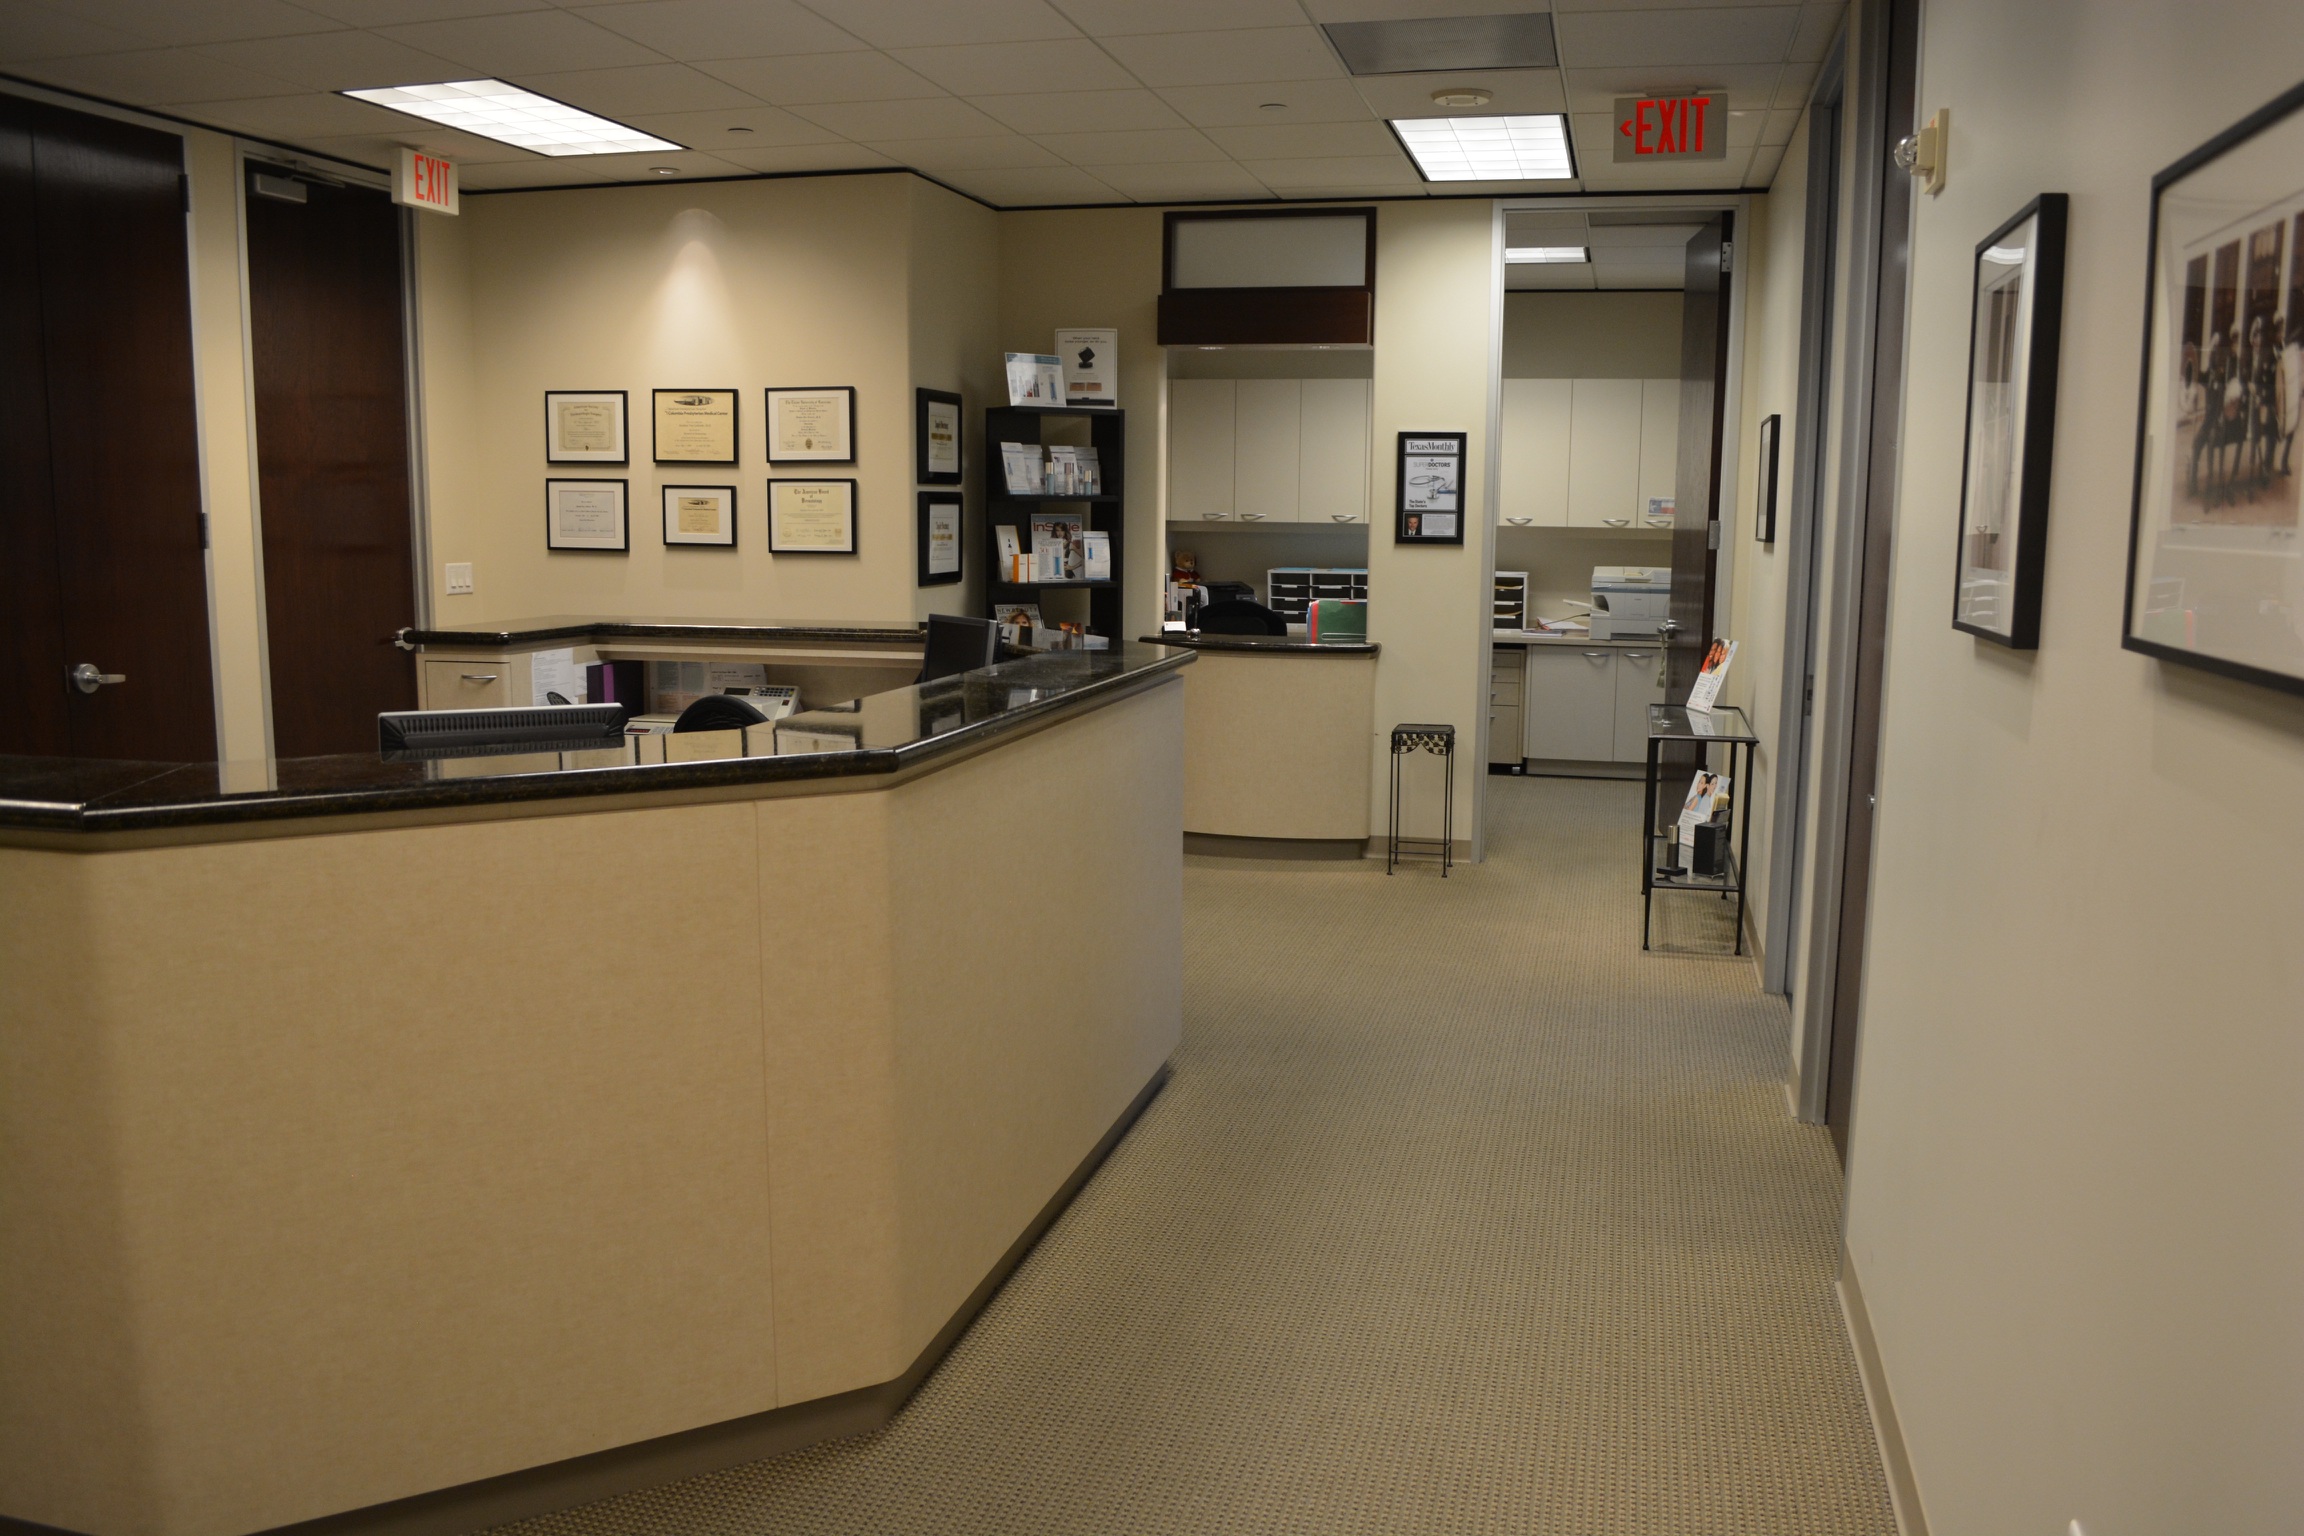 Office interior showing photographs, art and clinical workstation